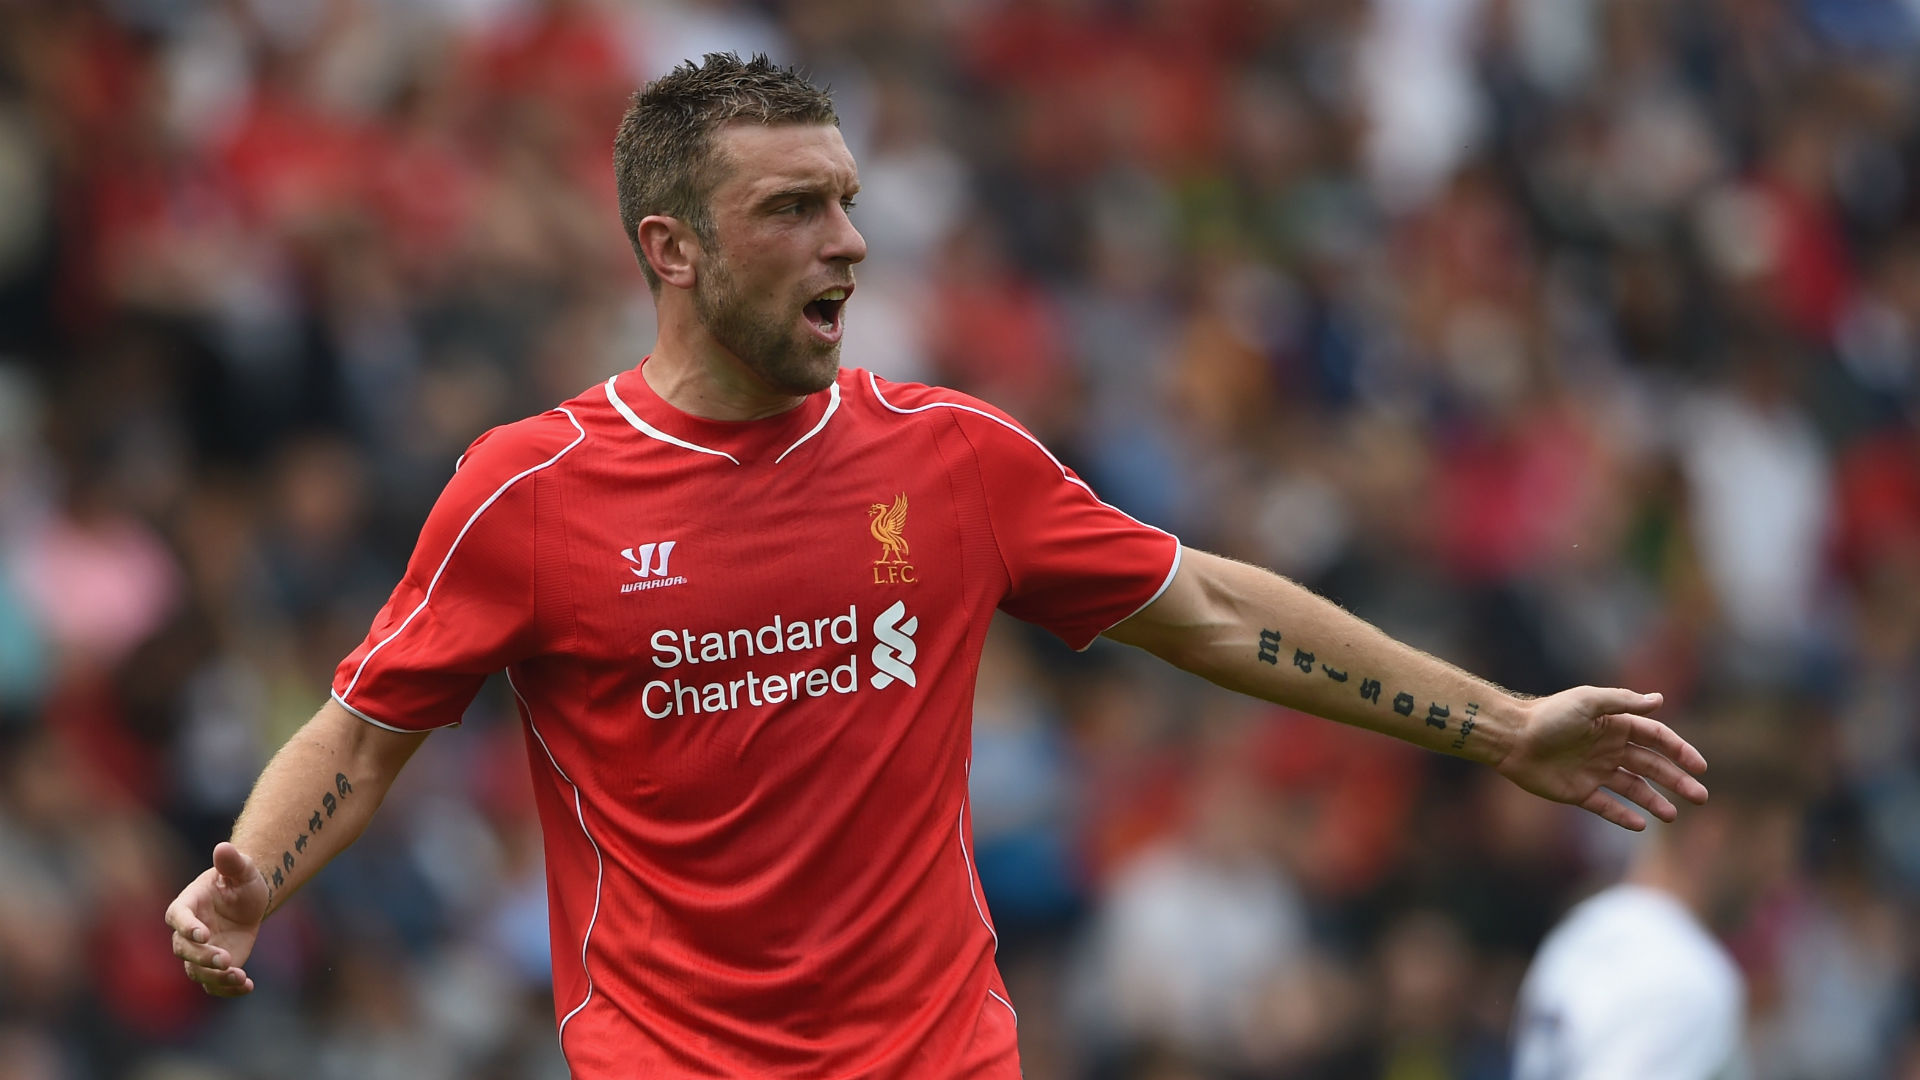 Liverpool news: Ex-Reds man Rickie Lambert reveals he fell out of love with  football after Anfield switch | Goal.com